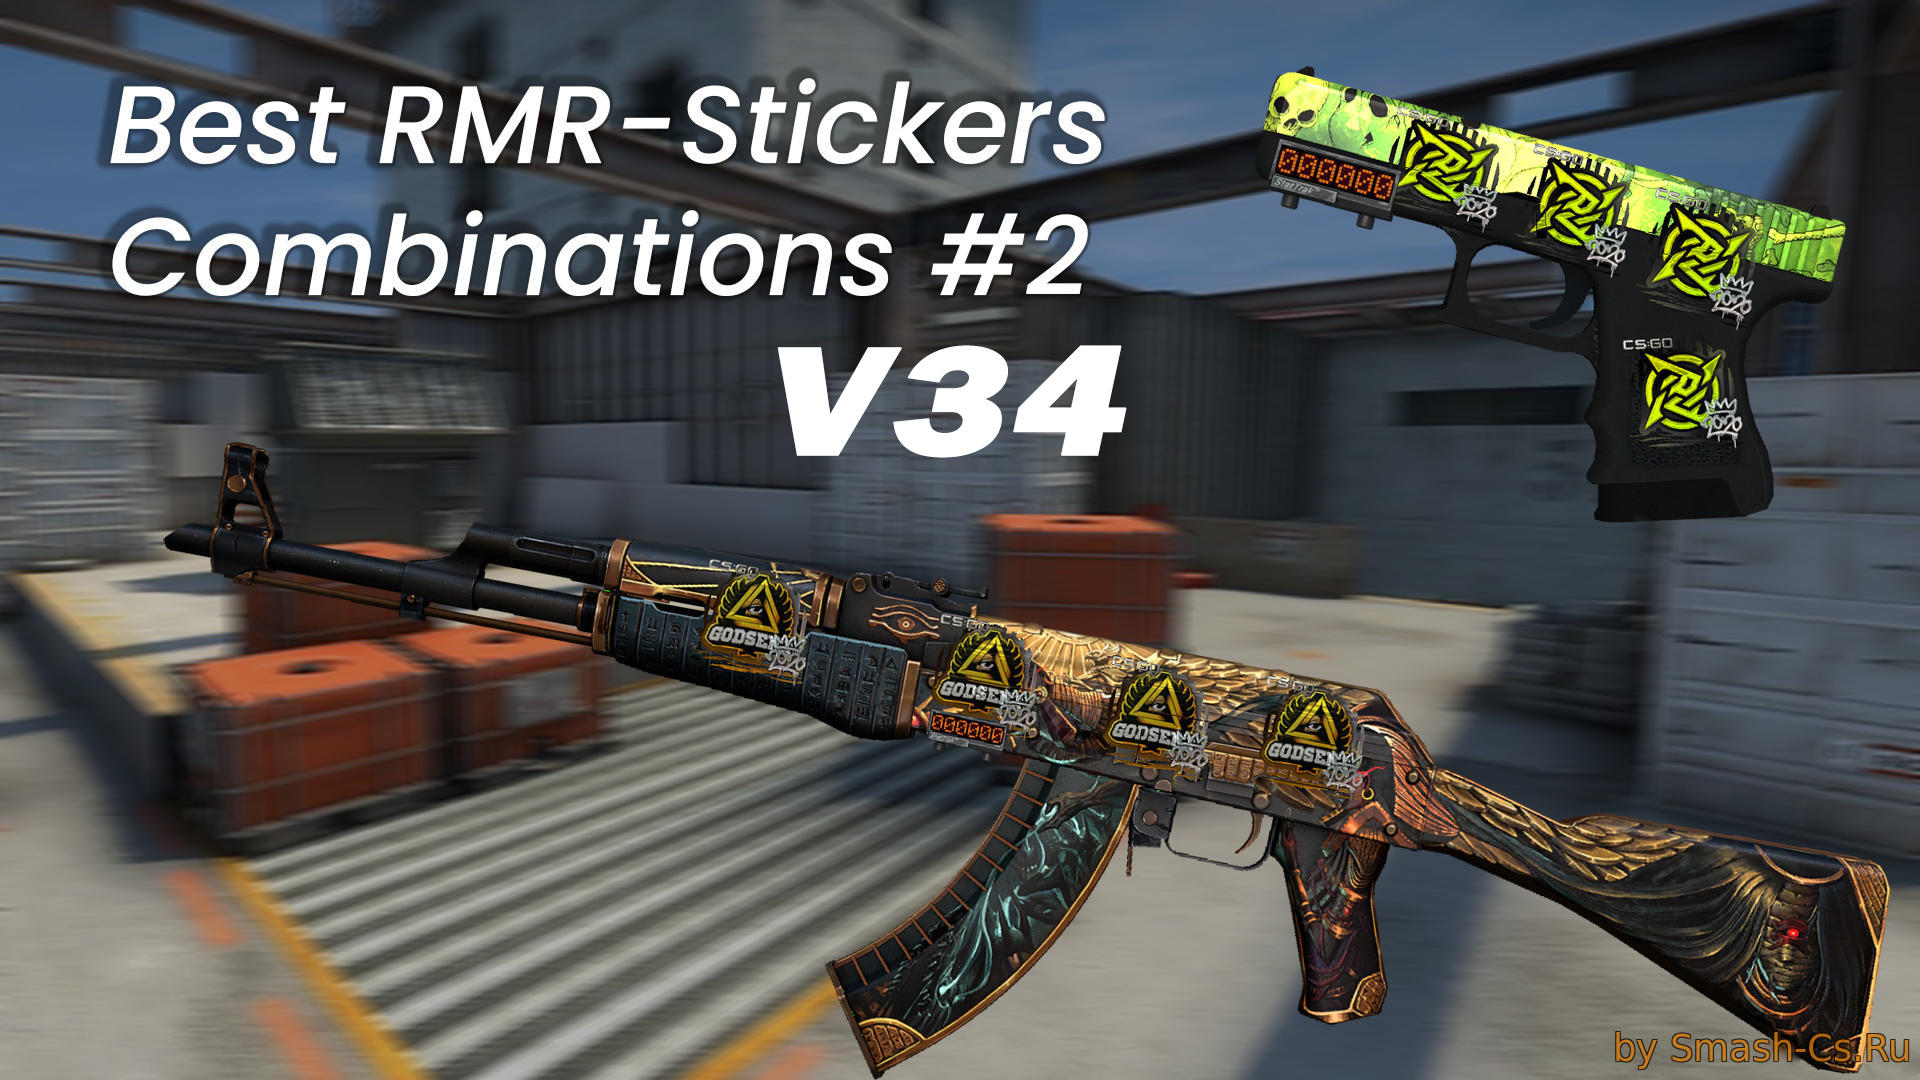 [v34] Best RMR-Stickers Combinations #2